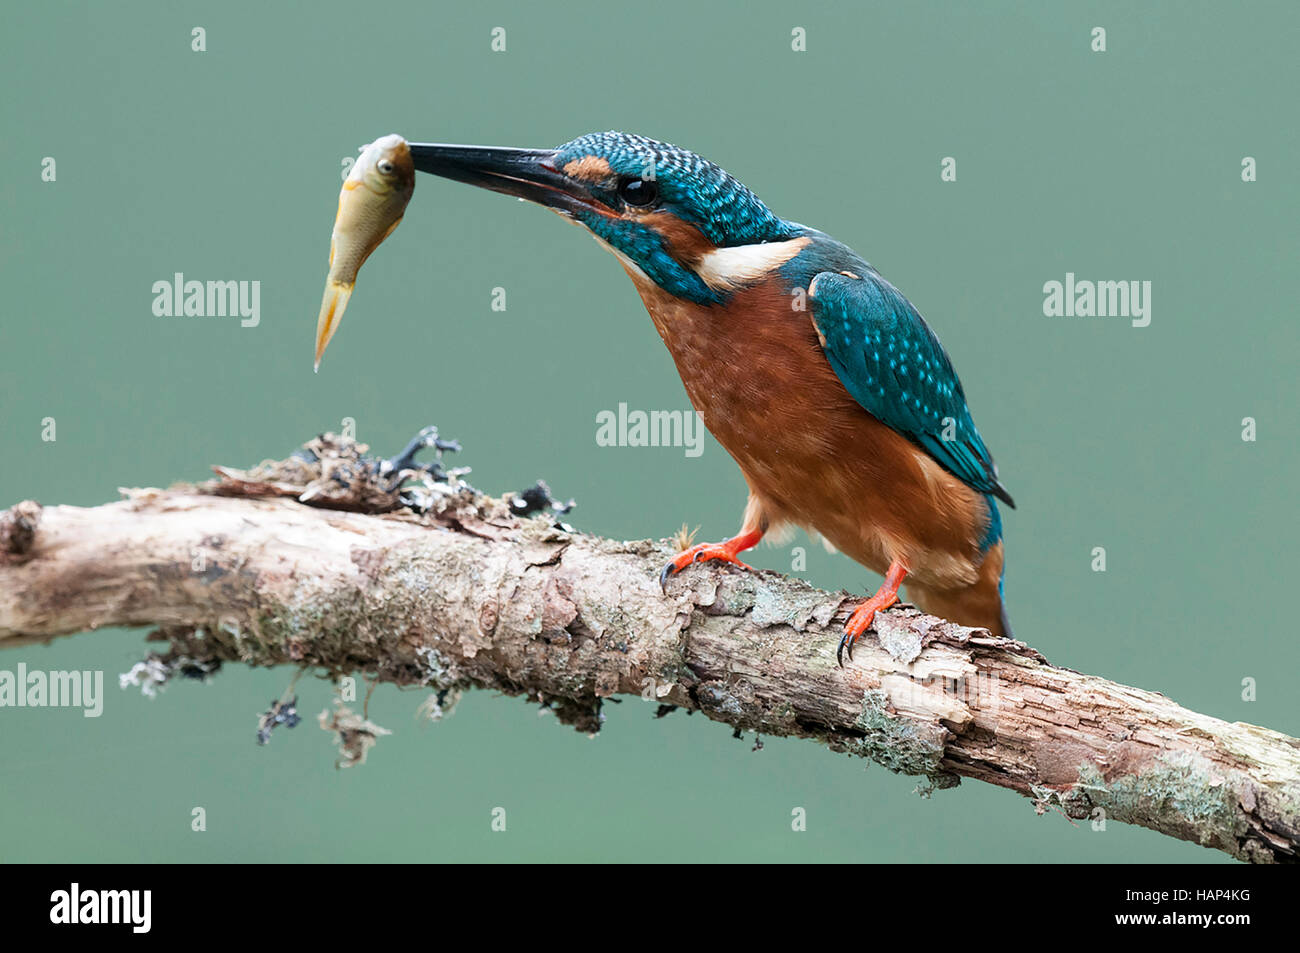 Male Kingfisher with a fish it has just caught Stock Photo